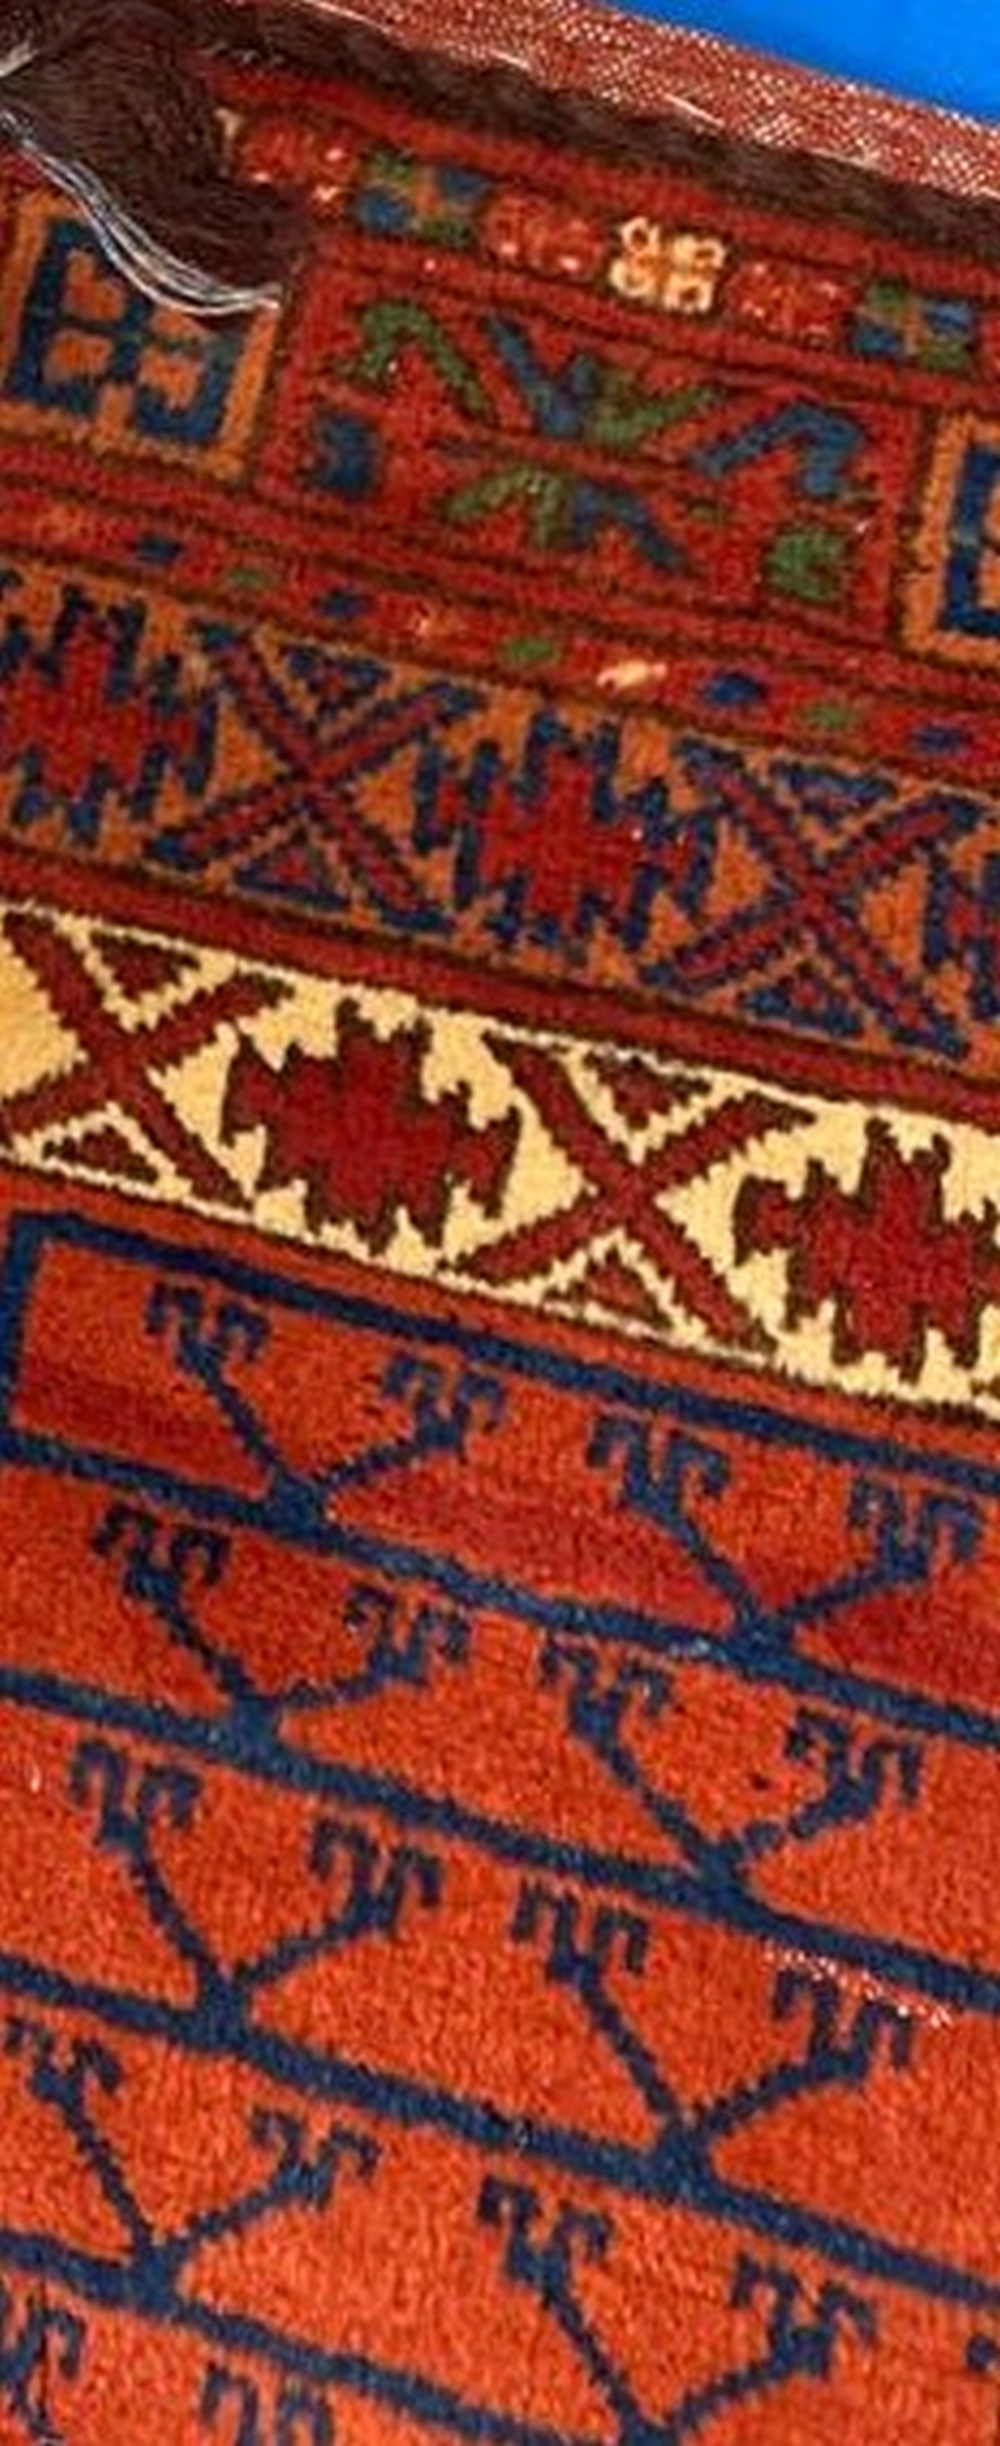 A VERY FINE RARE HATCHLI CARPET, hand woven in the Northern Provinces of Afghanistan c.1980. Materia - Image 4 of 4